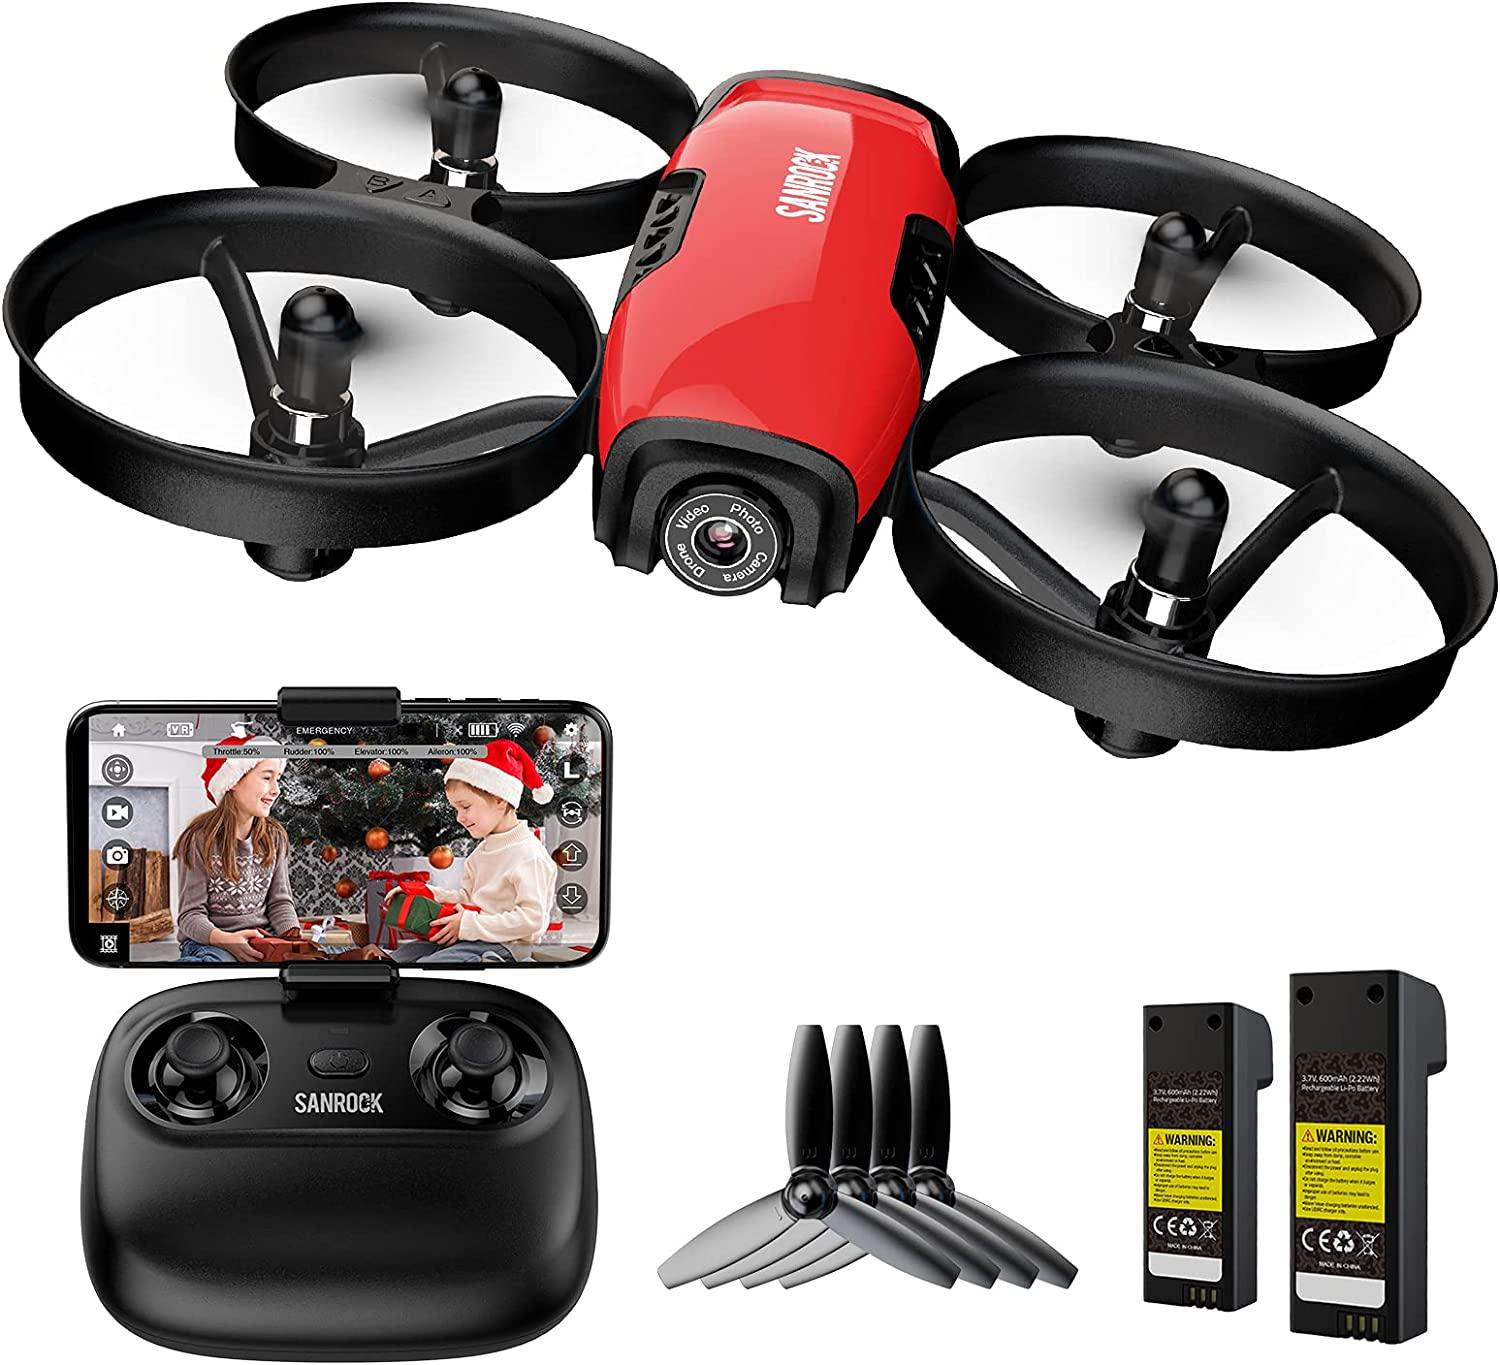 Adult Drone With Camera, Wifi Fpv Quadcopter With Altitude Hold